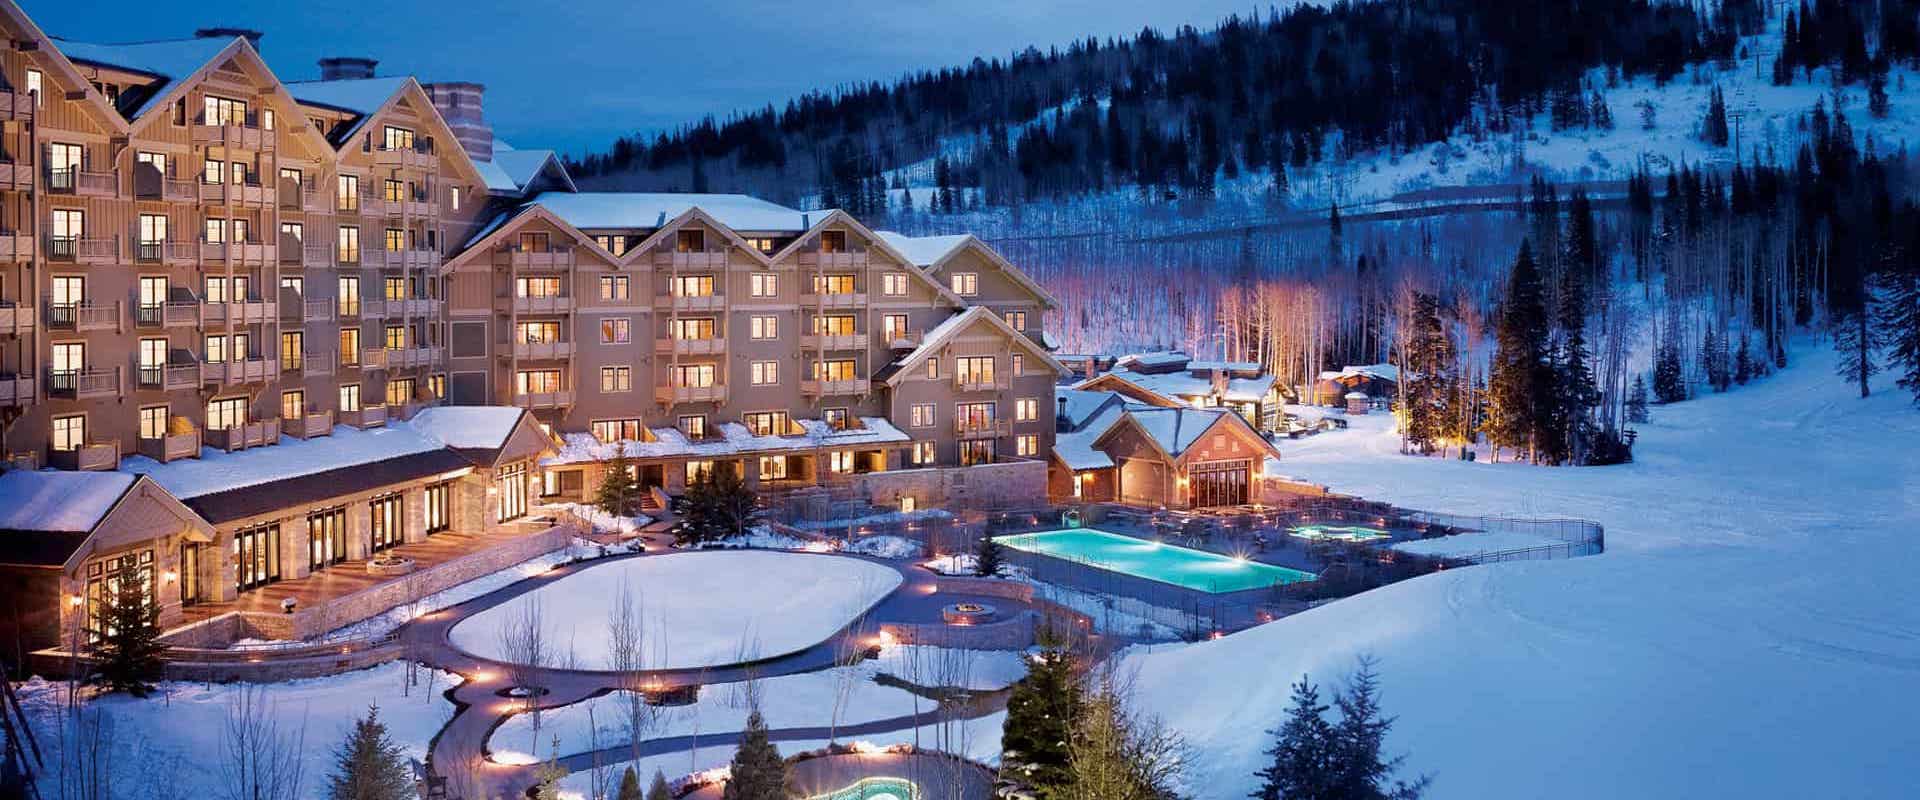 Top 10 Best Luxury Ski-in Ski-out Hotels in the US